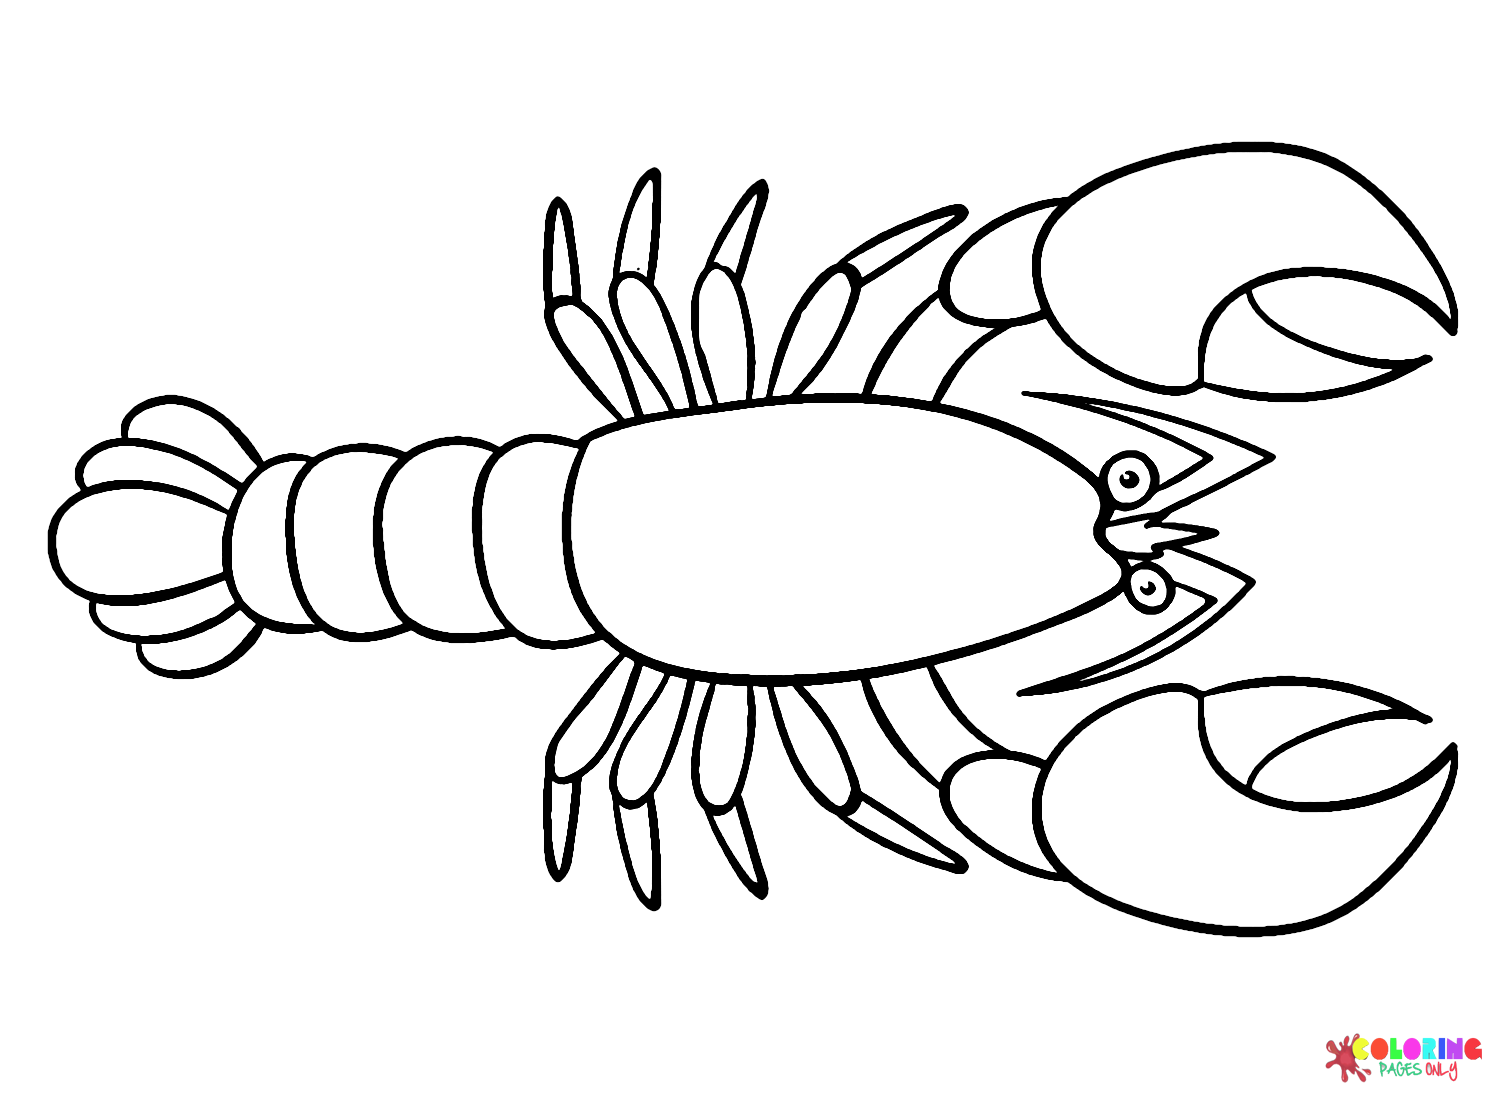 Draw Lobster Coloring Page